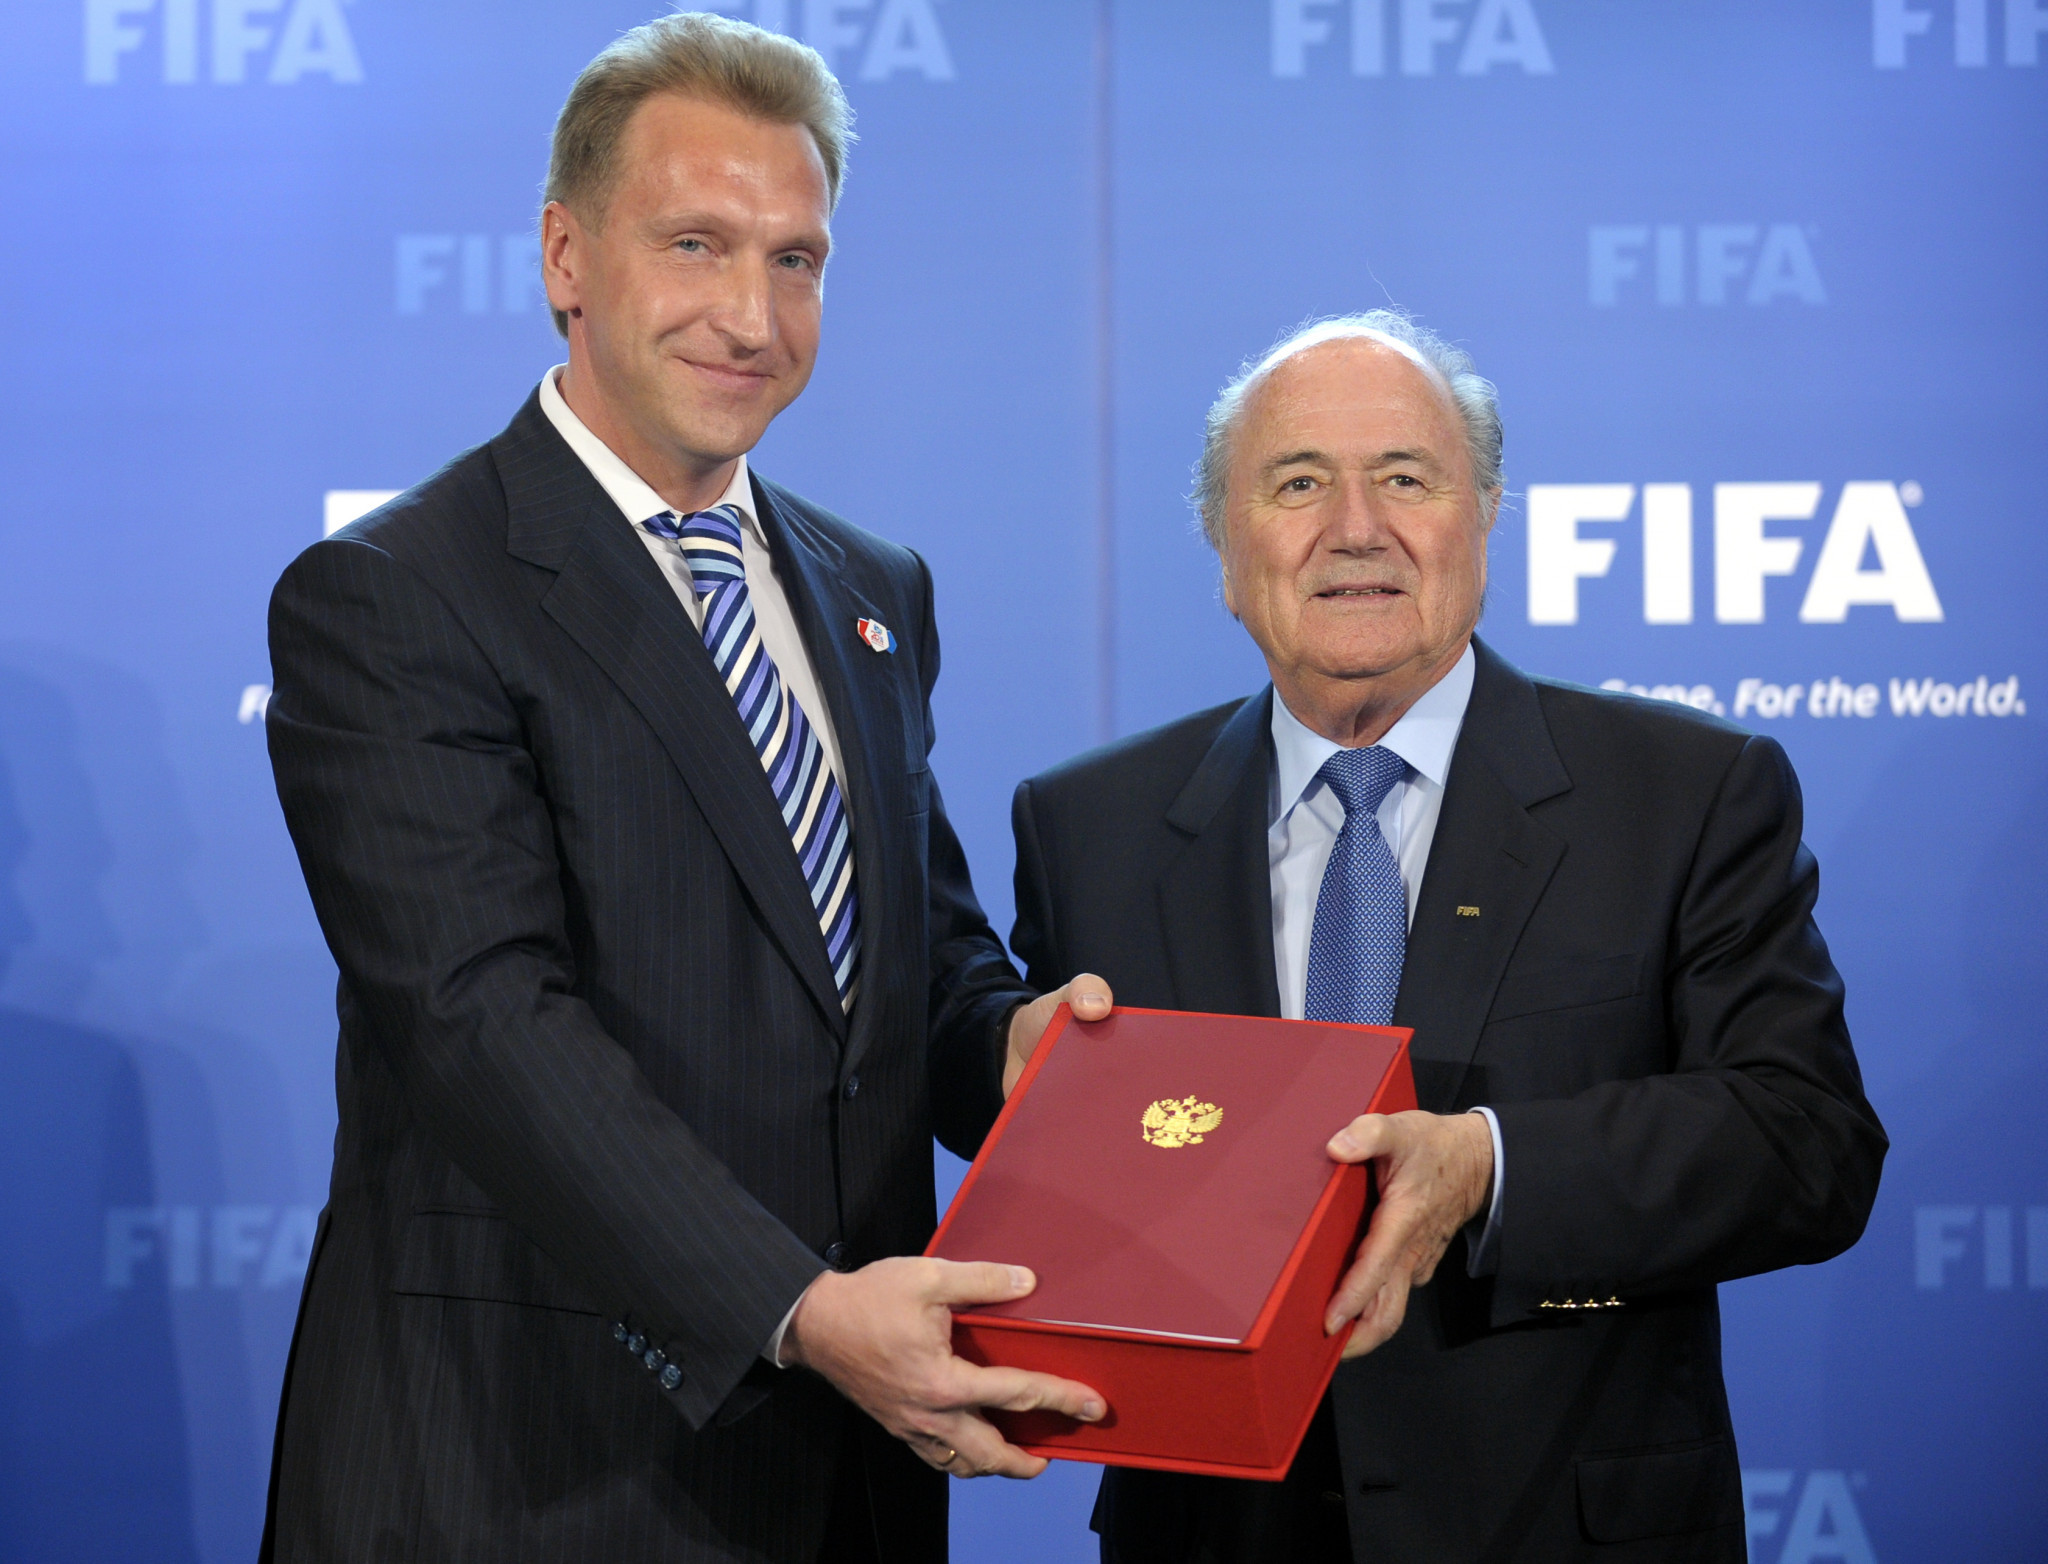 Igor Shuvalov, left, helped Russia to win the hosting rights for the 2018 FIFA World Cup ©Getty Images